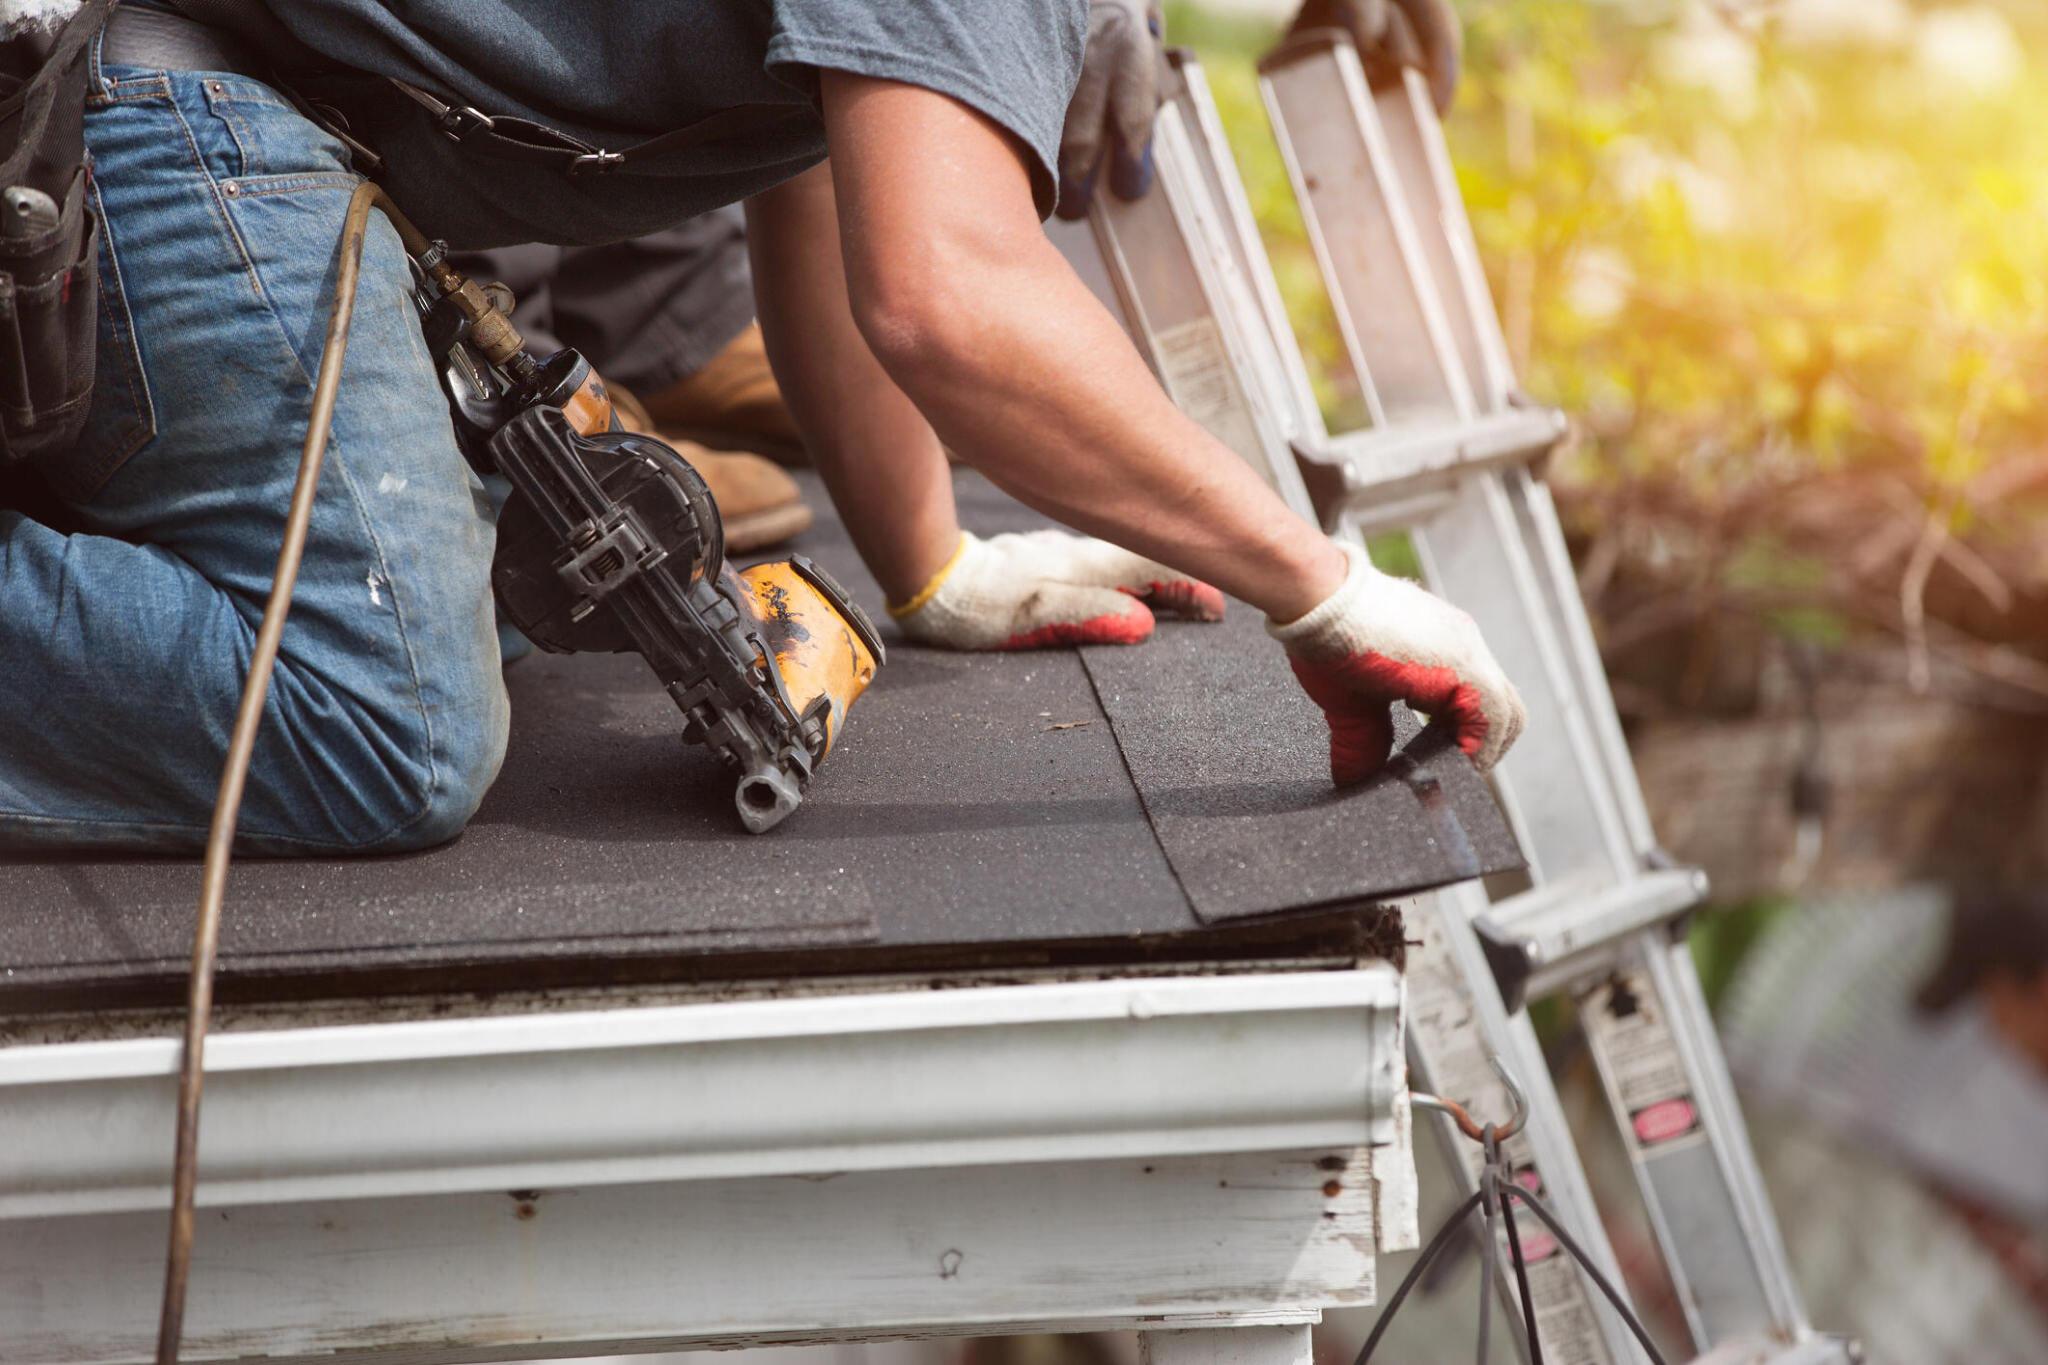 Top 8 Reasons DIY Roof Replacement is a DIY Don’t: Expert Advice from a Trusted Roofing Contractor